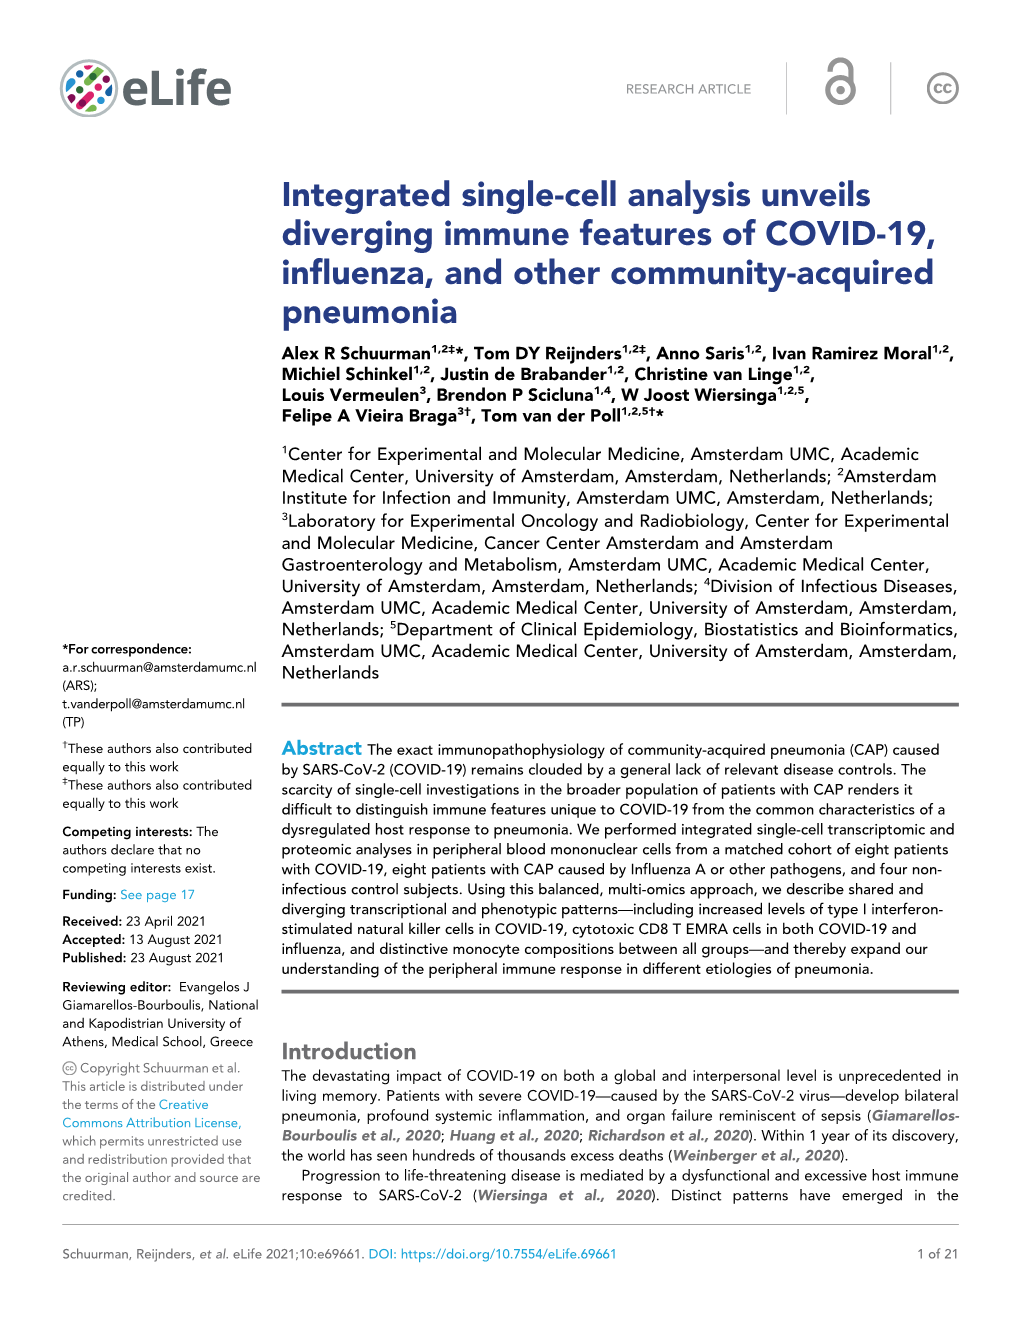 Integrated Single-Cell Analysis Unveils Diverging Immune Features Of